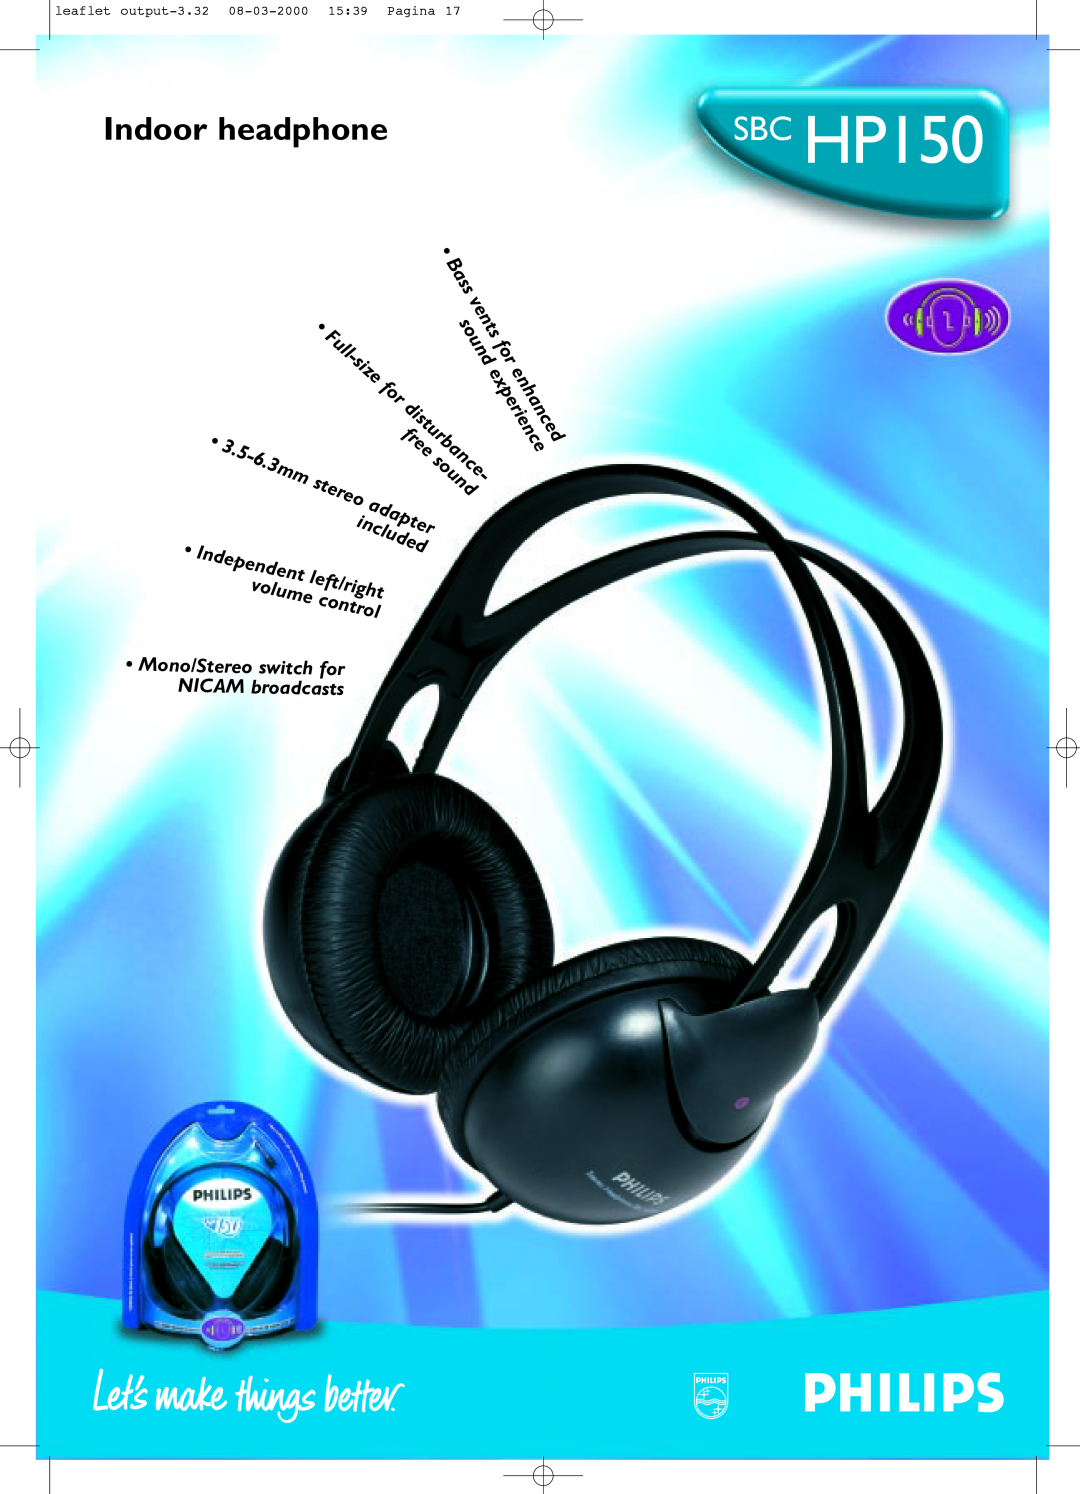 Philips SBCHP150 manual SBC HP150, Indoor headphone, size, sound, stereo, Full, experience, control, Bass, vents, enhanced 